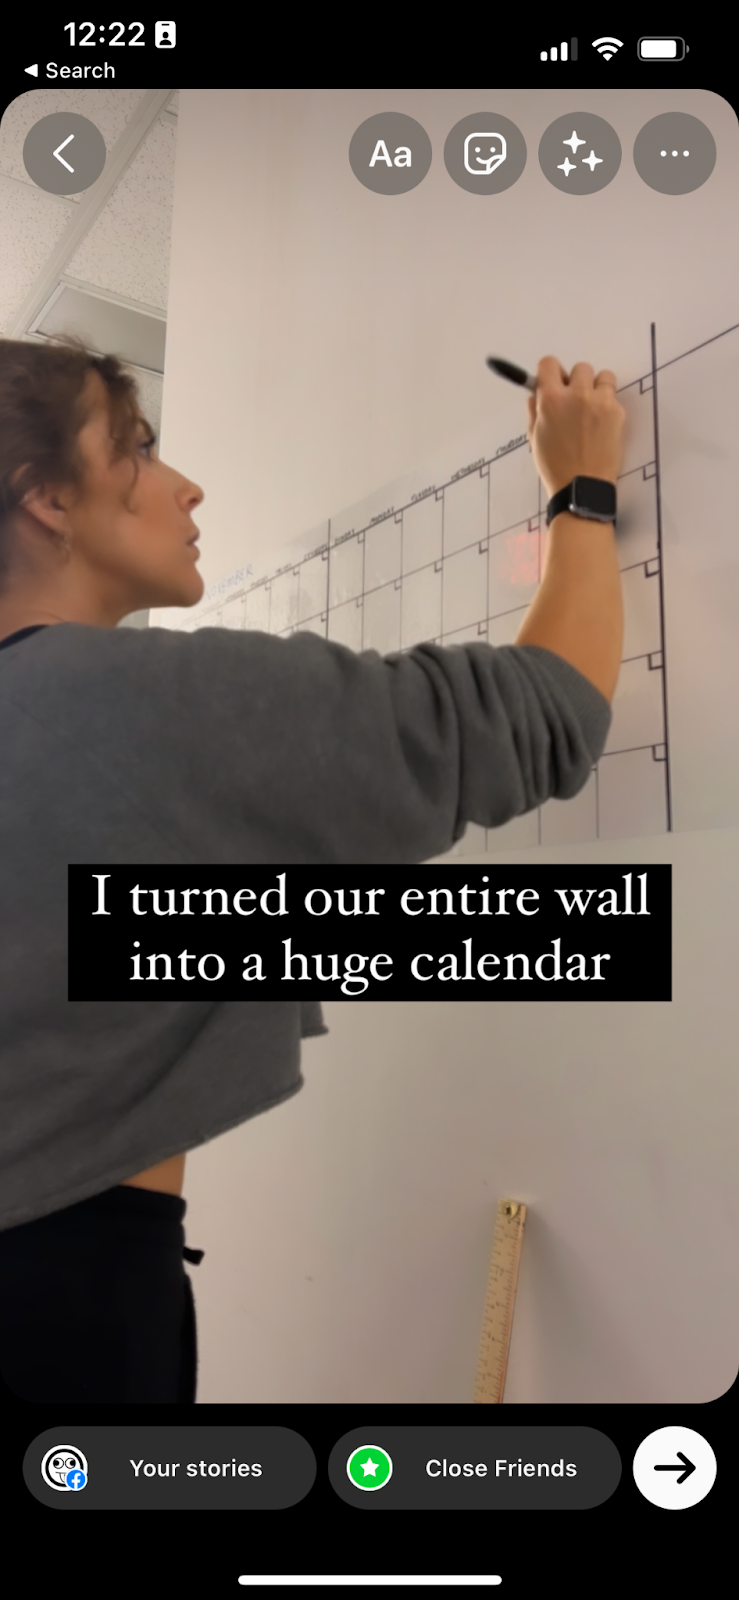 Screenshot of Inspired Idiots Kelsey creating a large wall calendar for the office space, added into Instagram Story editing with text overtop that reads “I turned our entire wall into a huge calendar."